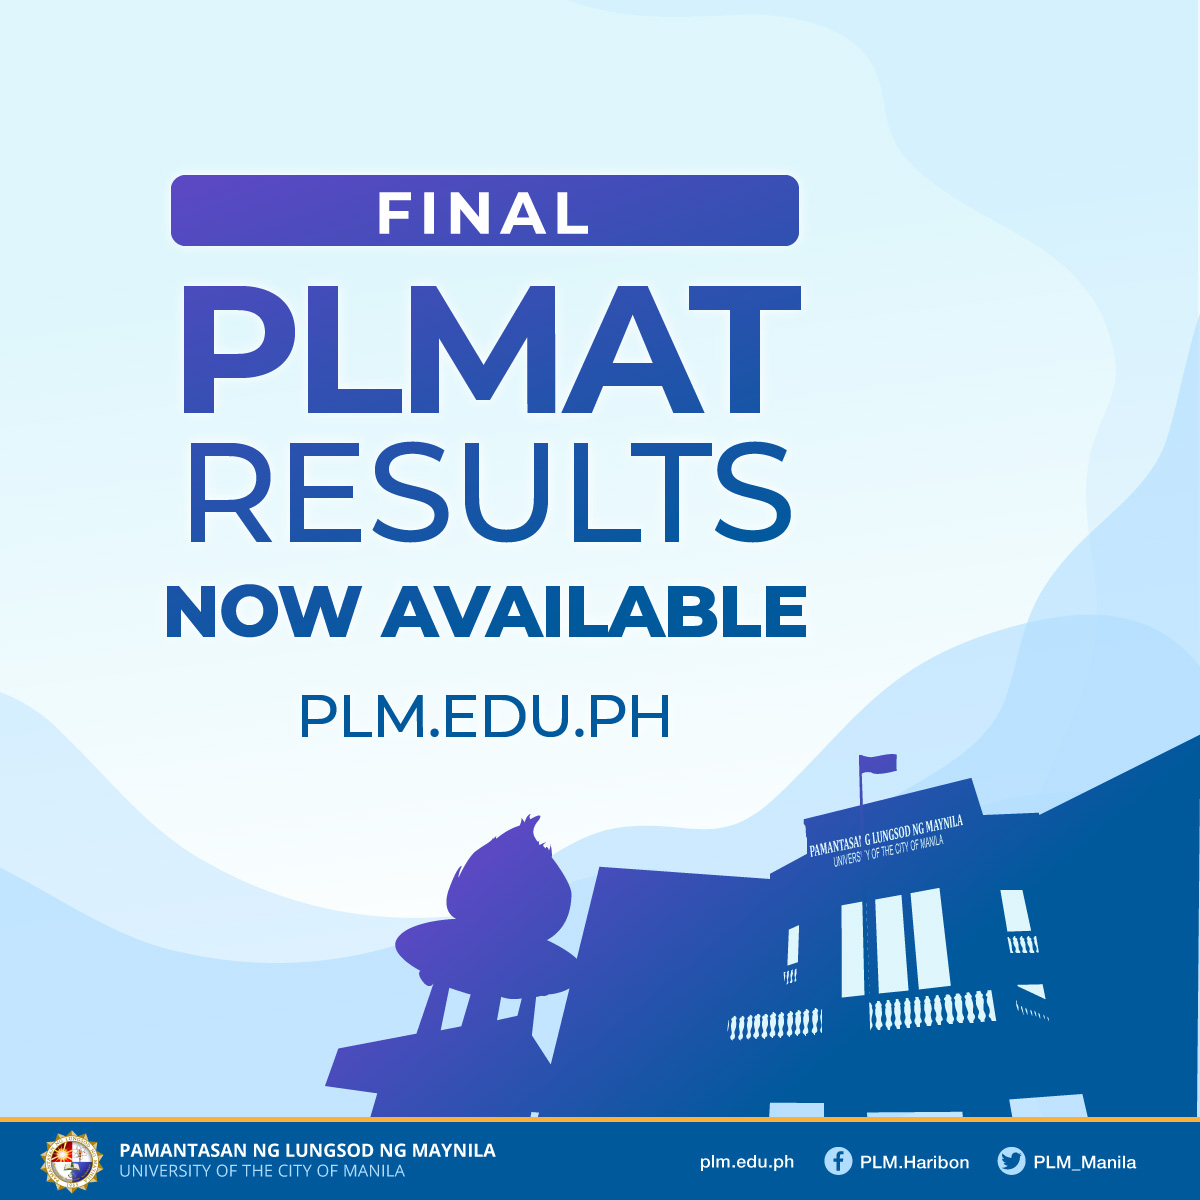 PLM accepts 6,705 freshmen students for Academic Year 2020-2021